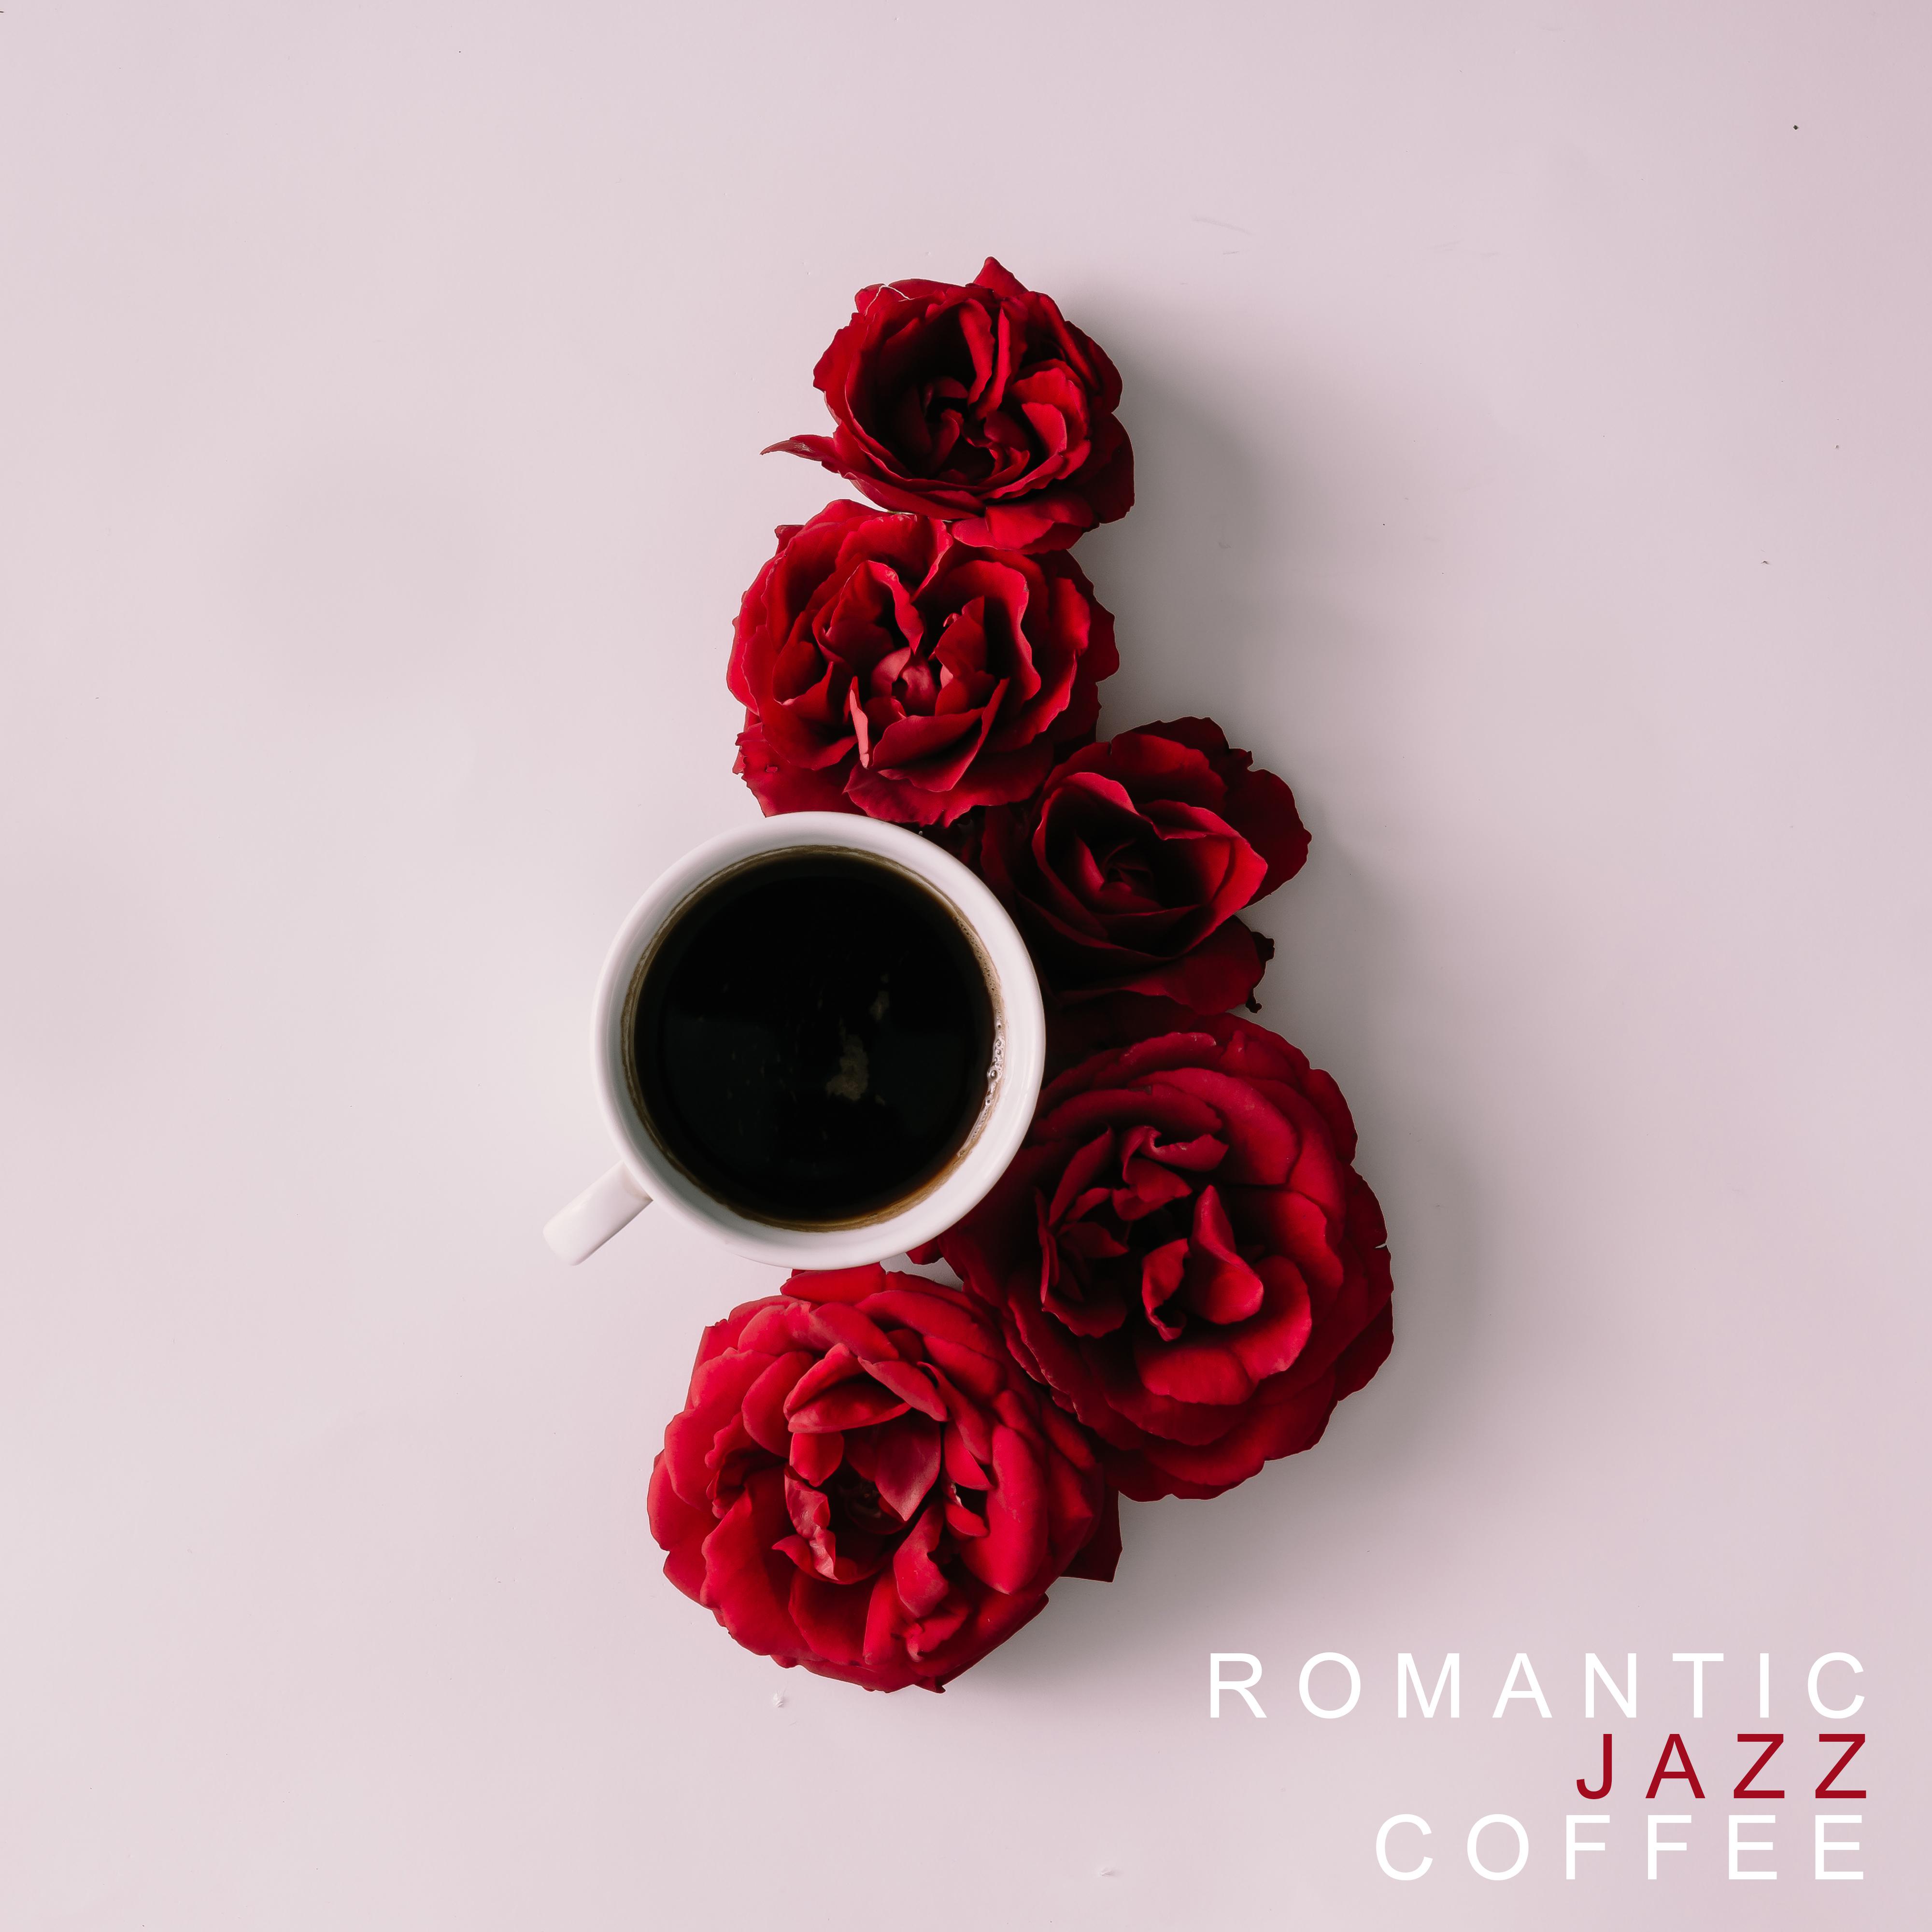 Romantic Jazz Coffee: Instrumental Sounds for Making Love, Romantic Time, Jazz Vibes, Peaceful Jazz